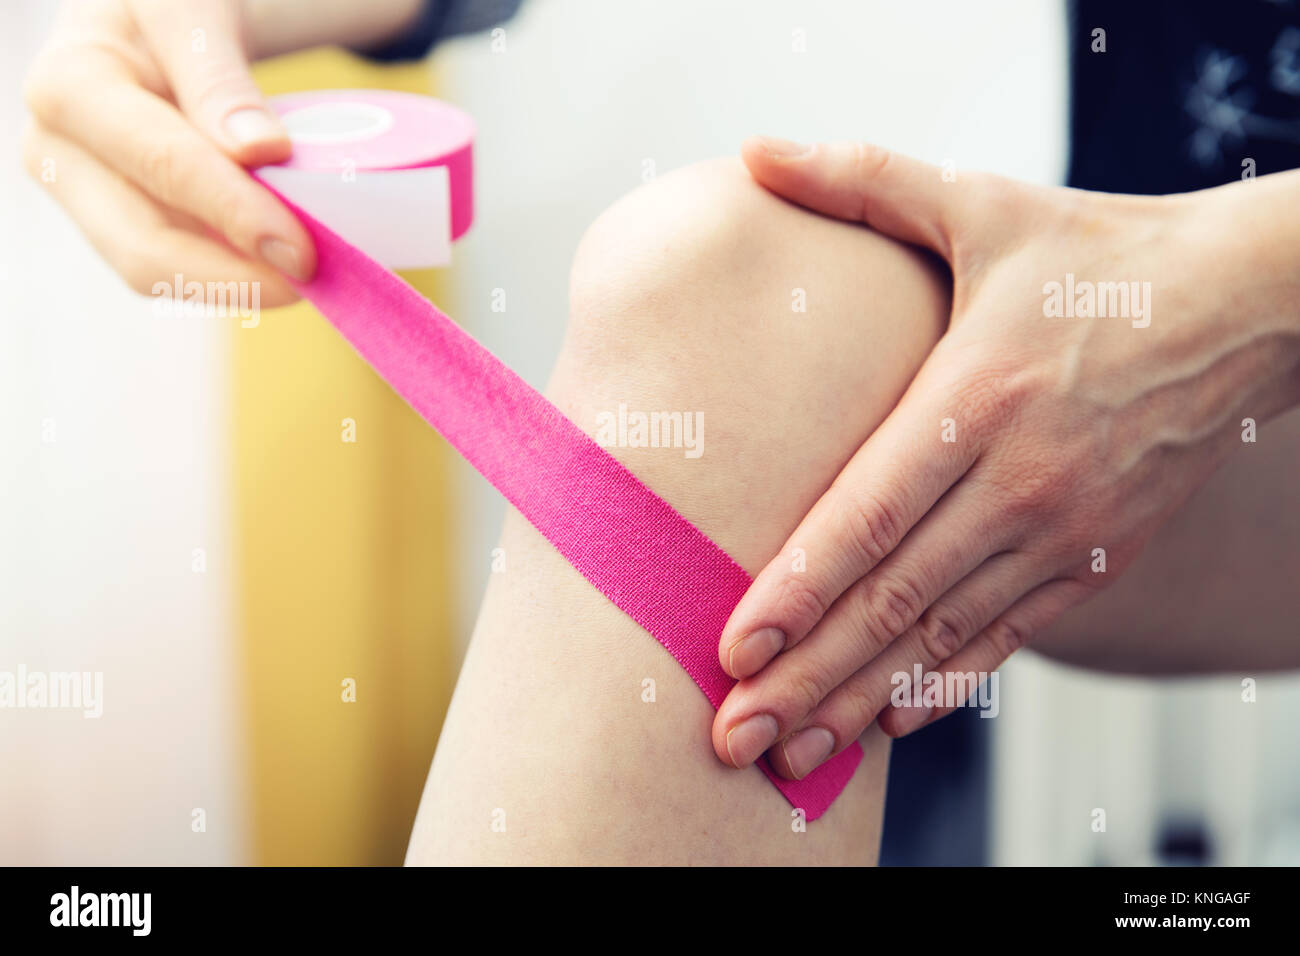 woman taping her knee with kinesio tape Stock Photo